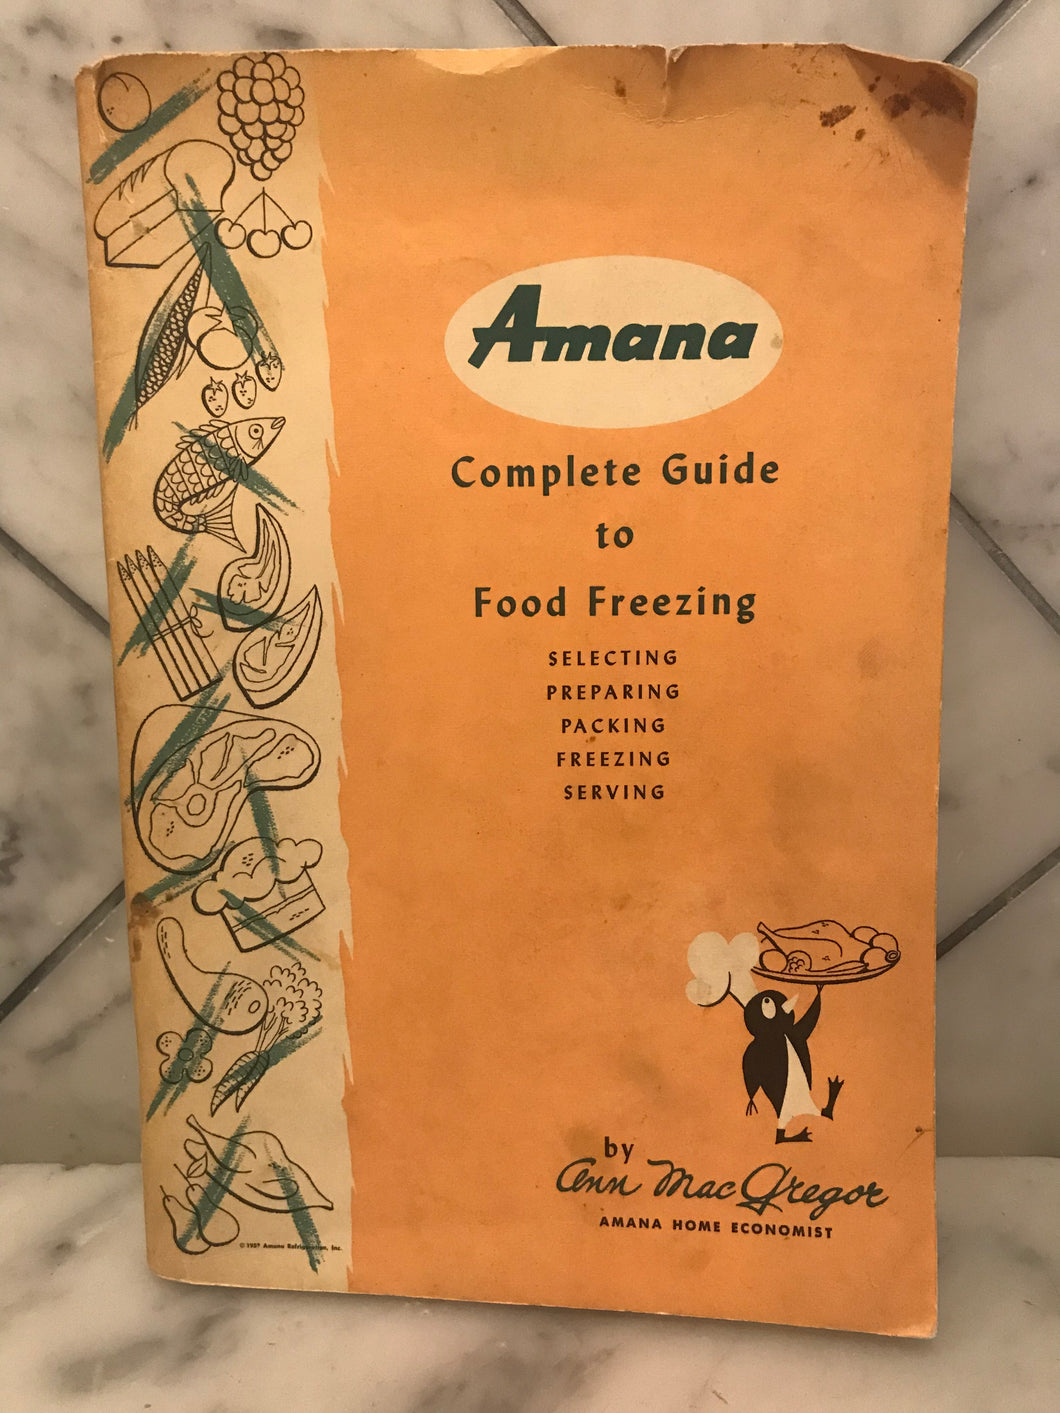 Amana Complete Guide to Food Freezing, Selecting, Preparing, Packing, Freezing, Serving